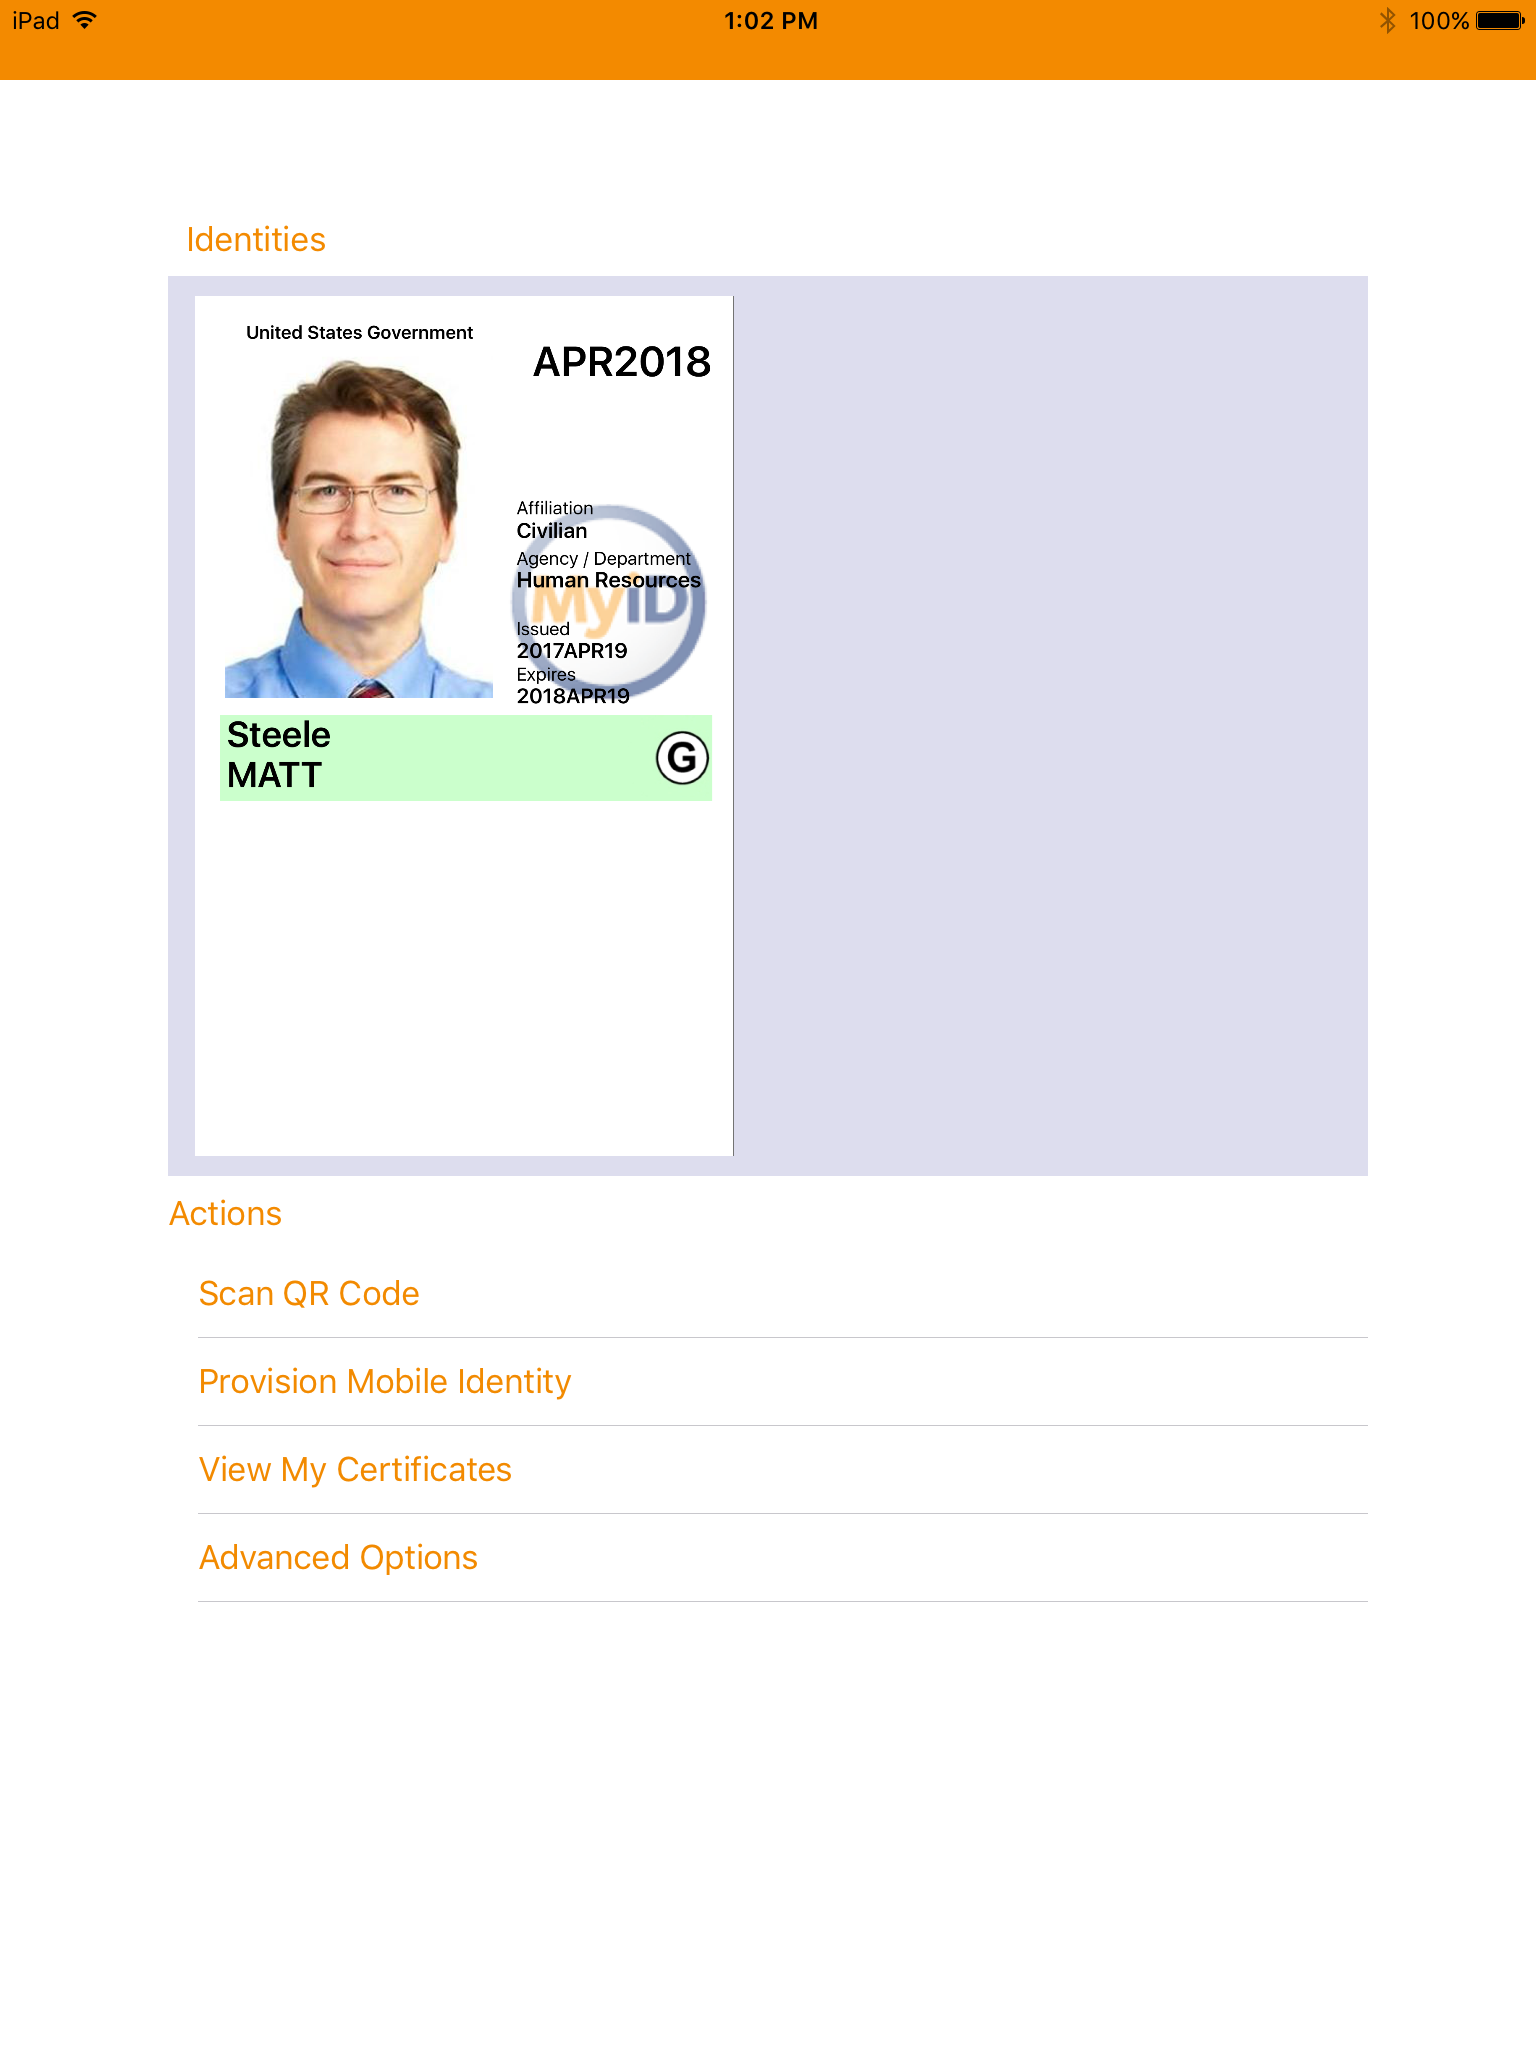 A virtual image of a PIV Card as shown in the MyID Identity Agent mobile application.